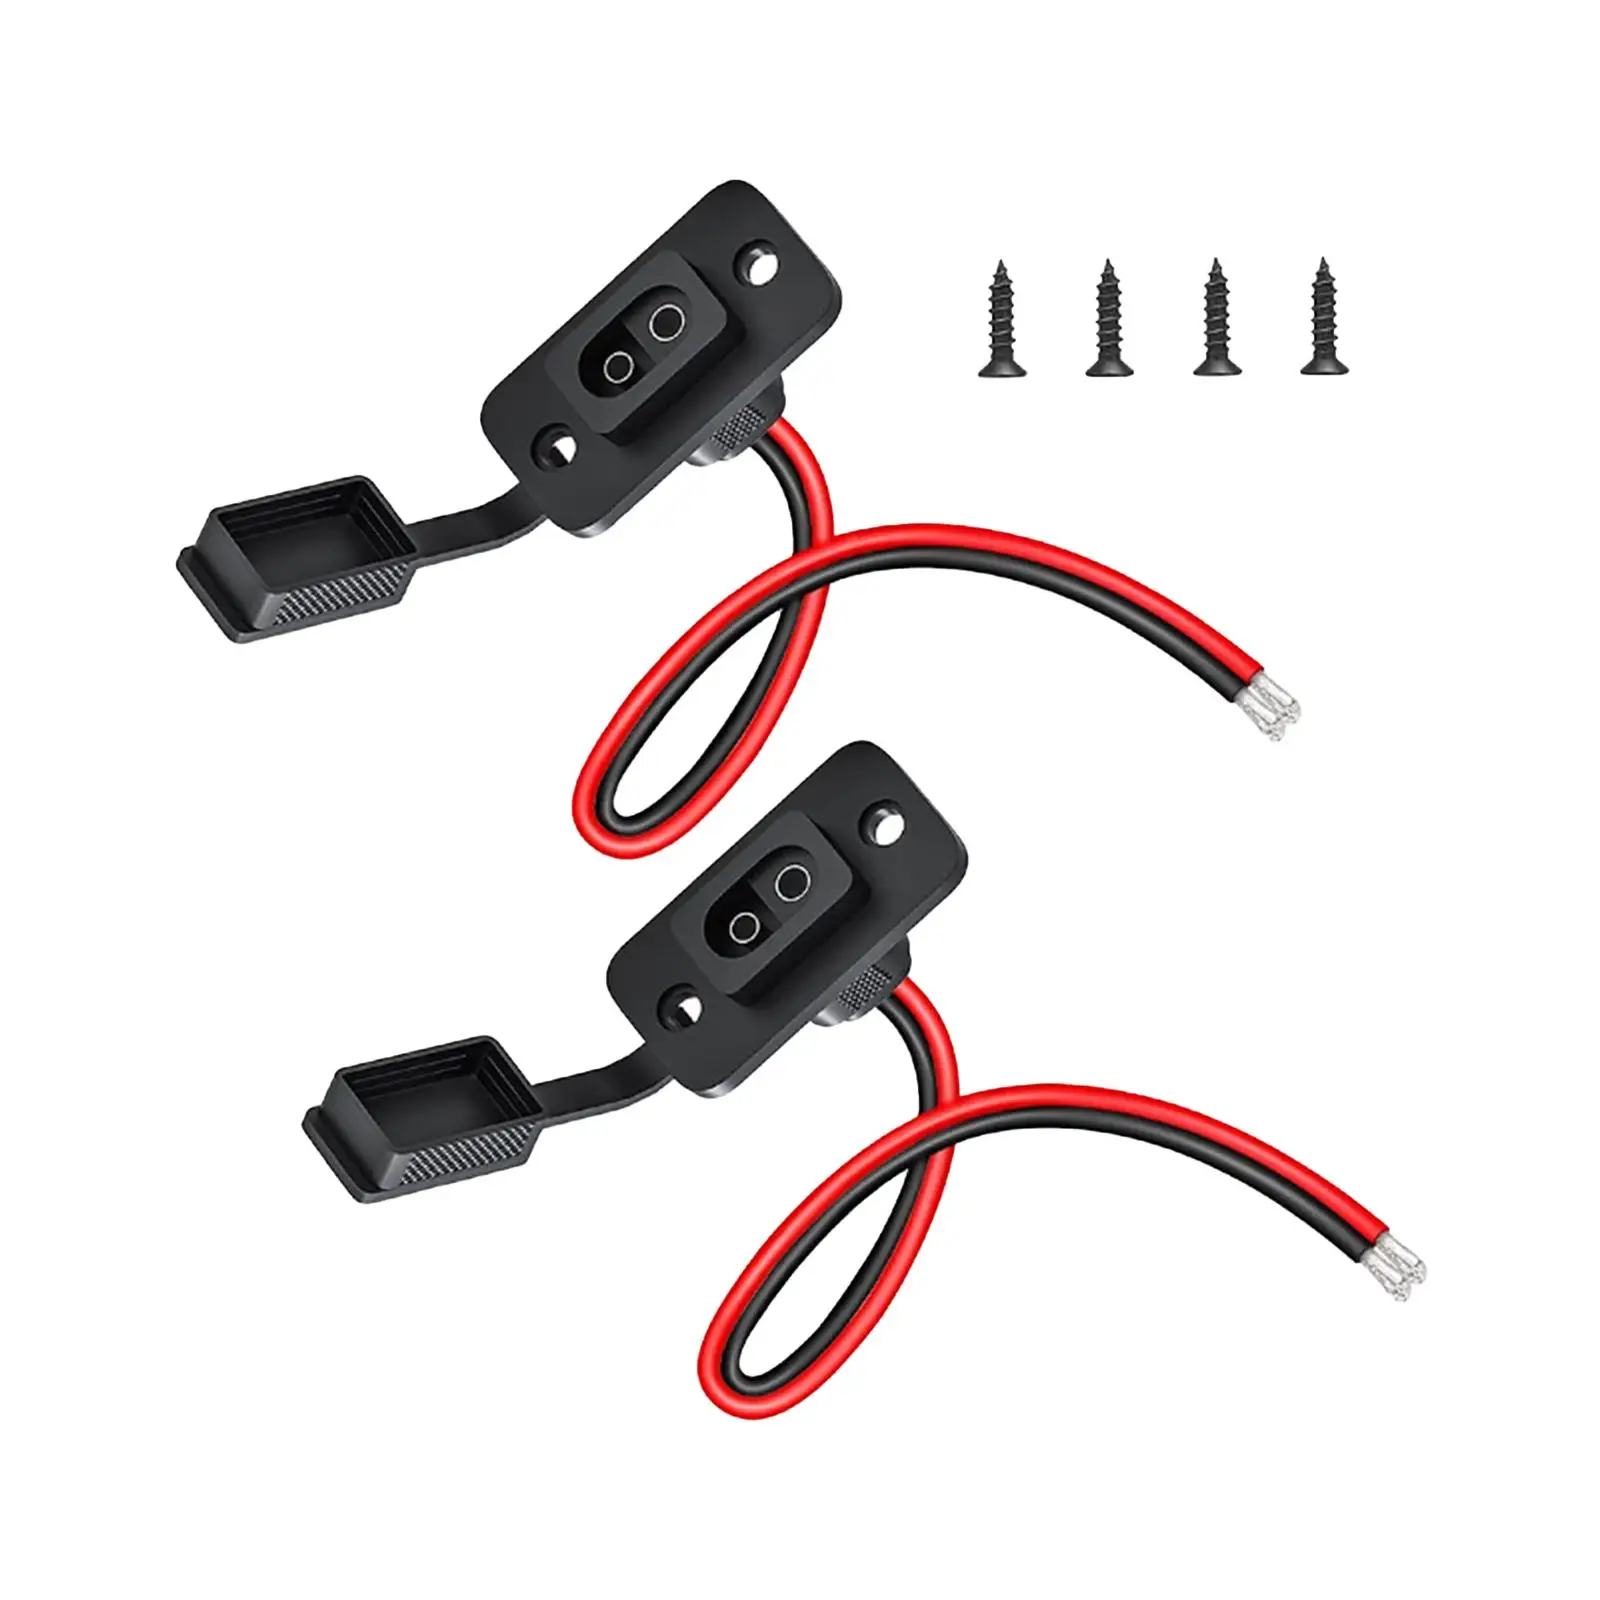 2 Pieces SAE Socket Cars Quick Connect Disconnect Accessory Extension Cord